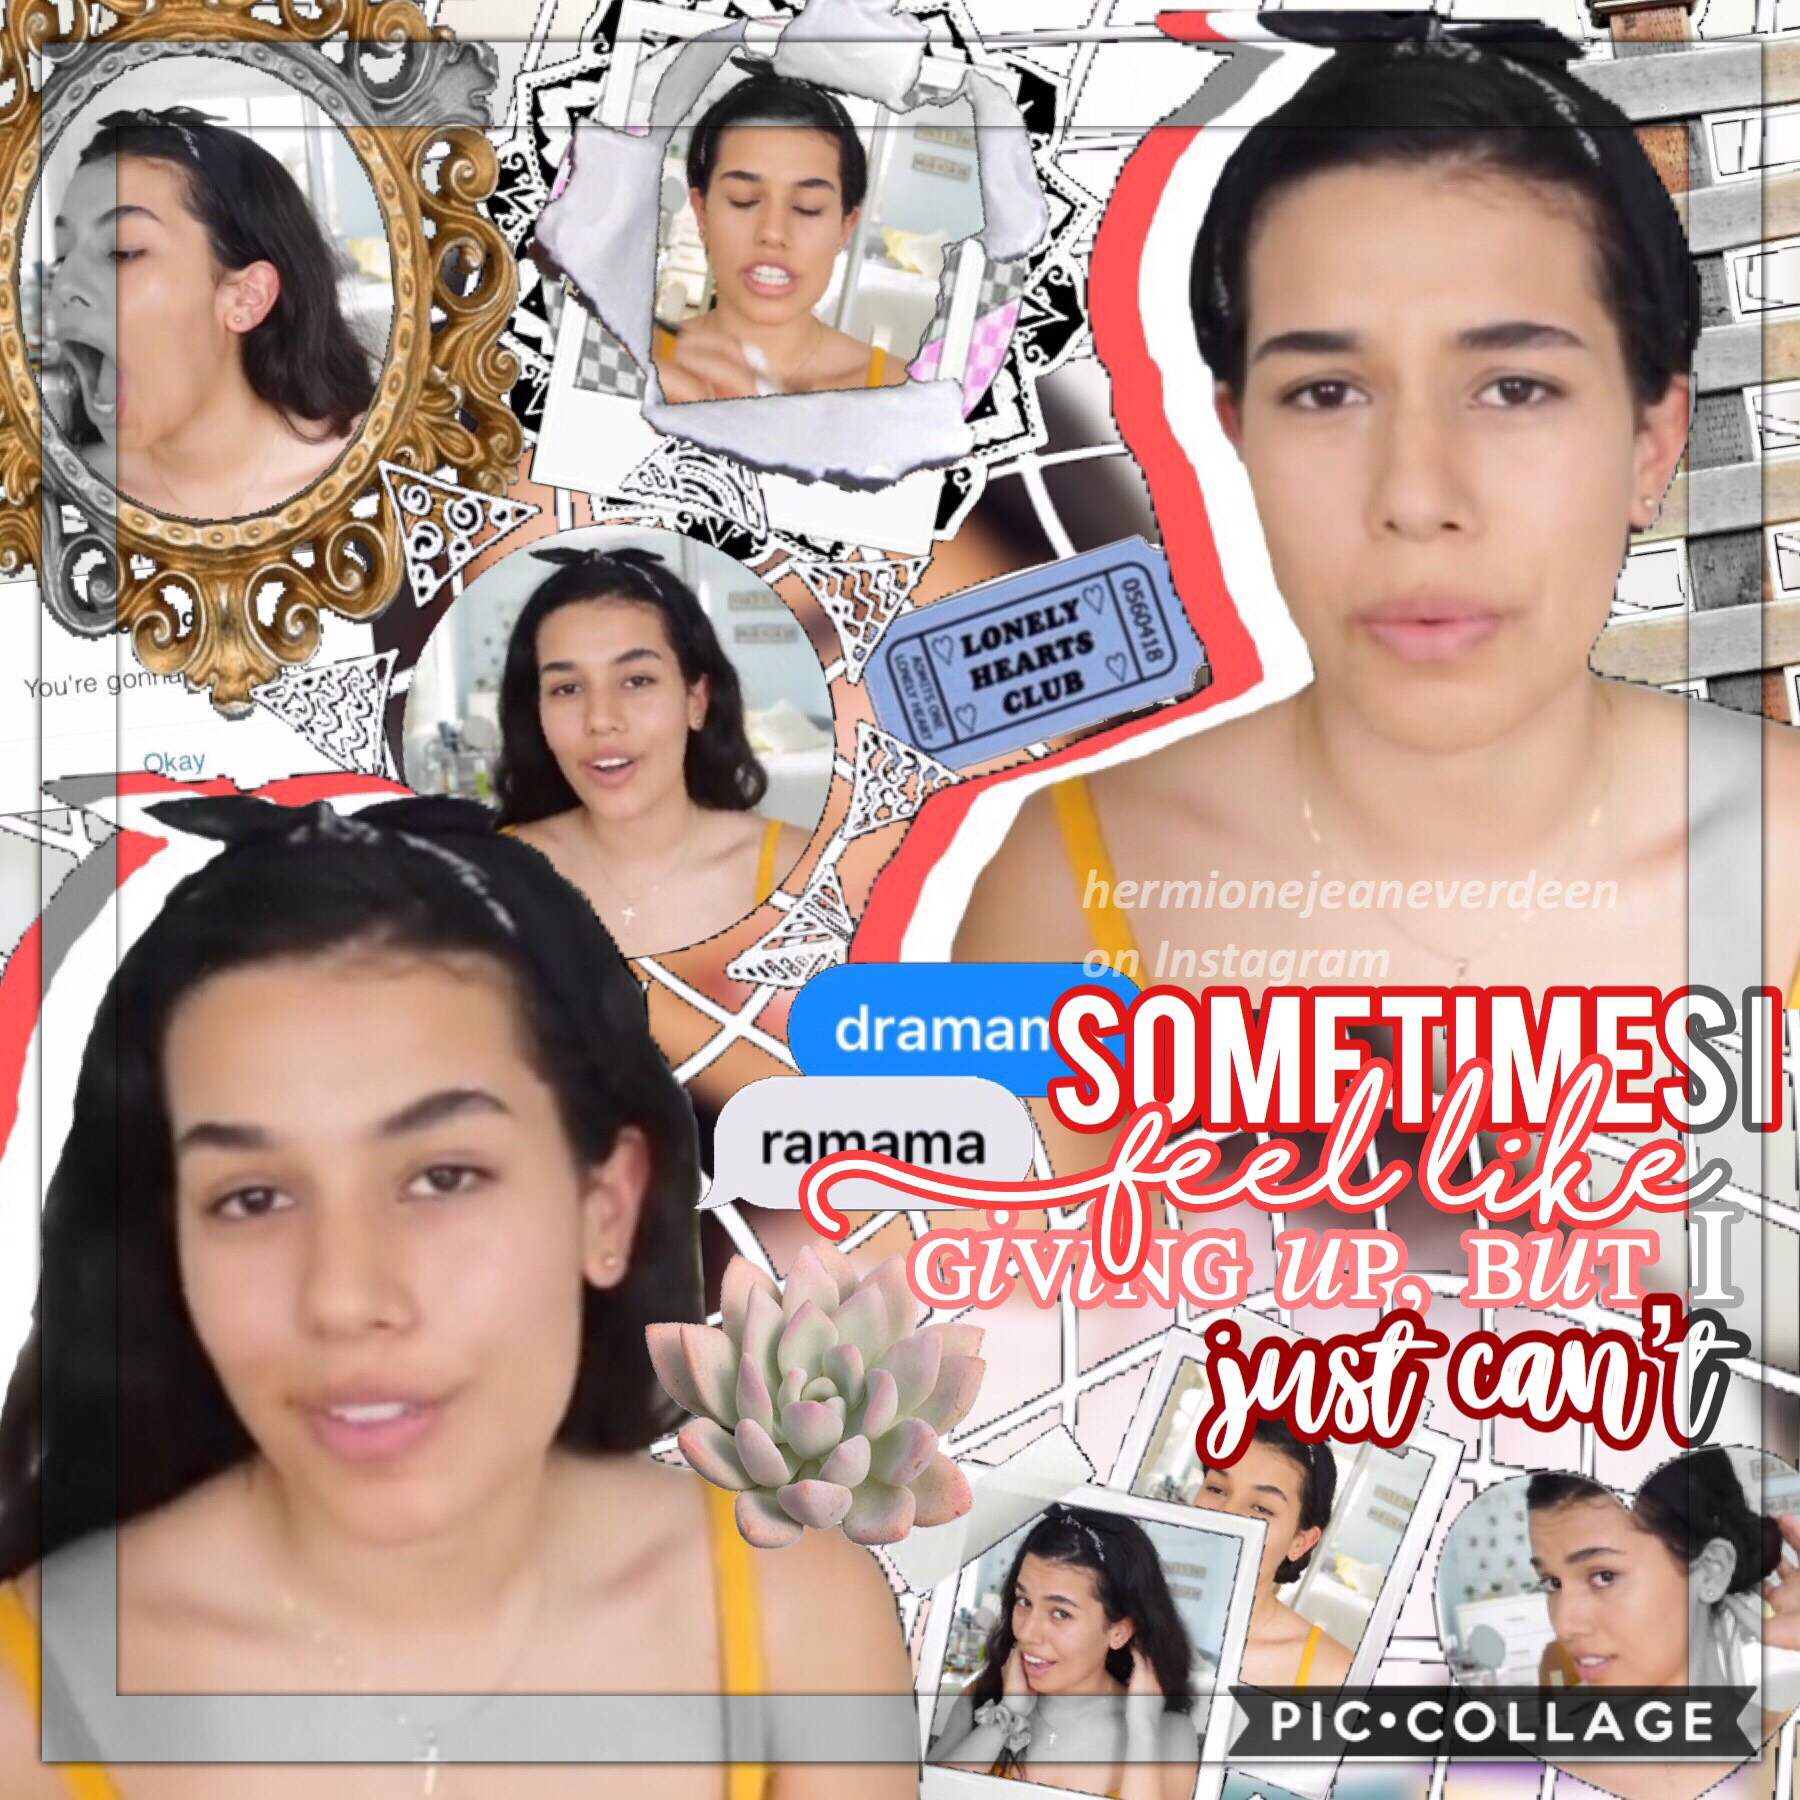 TAP NOW
MY FIRST VIDEO IS OUT!!!!!! IT IS SHOWING I HOW I EDIT THIS STYLE OF EDIT!!! my channel is itsnotjustaurora no capitals or spaces. be sure to watch it!❤️ also, this edit is of Ava Jules, she’s a smaller YouTuber, be sure to check her out as well!